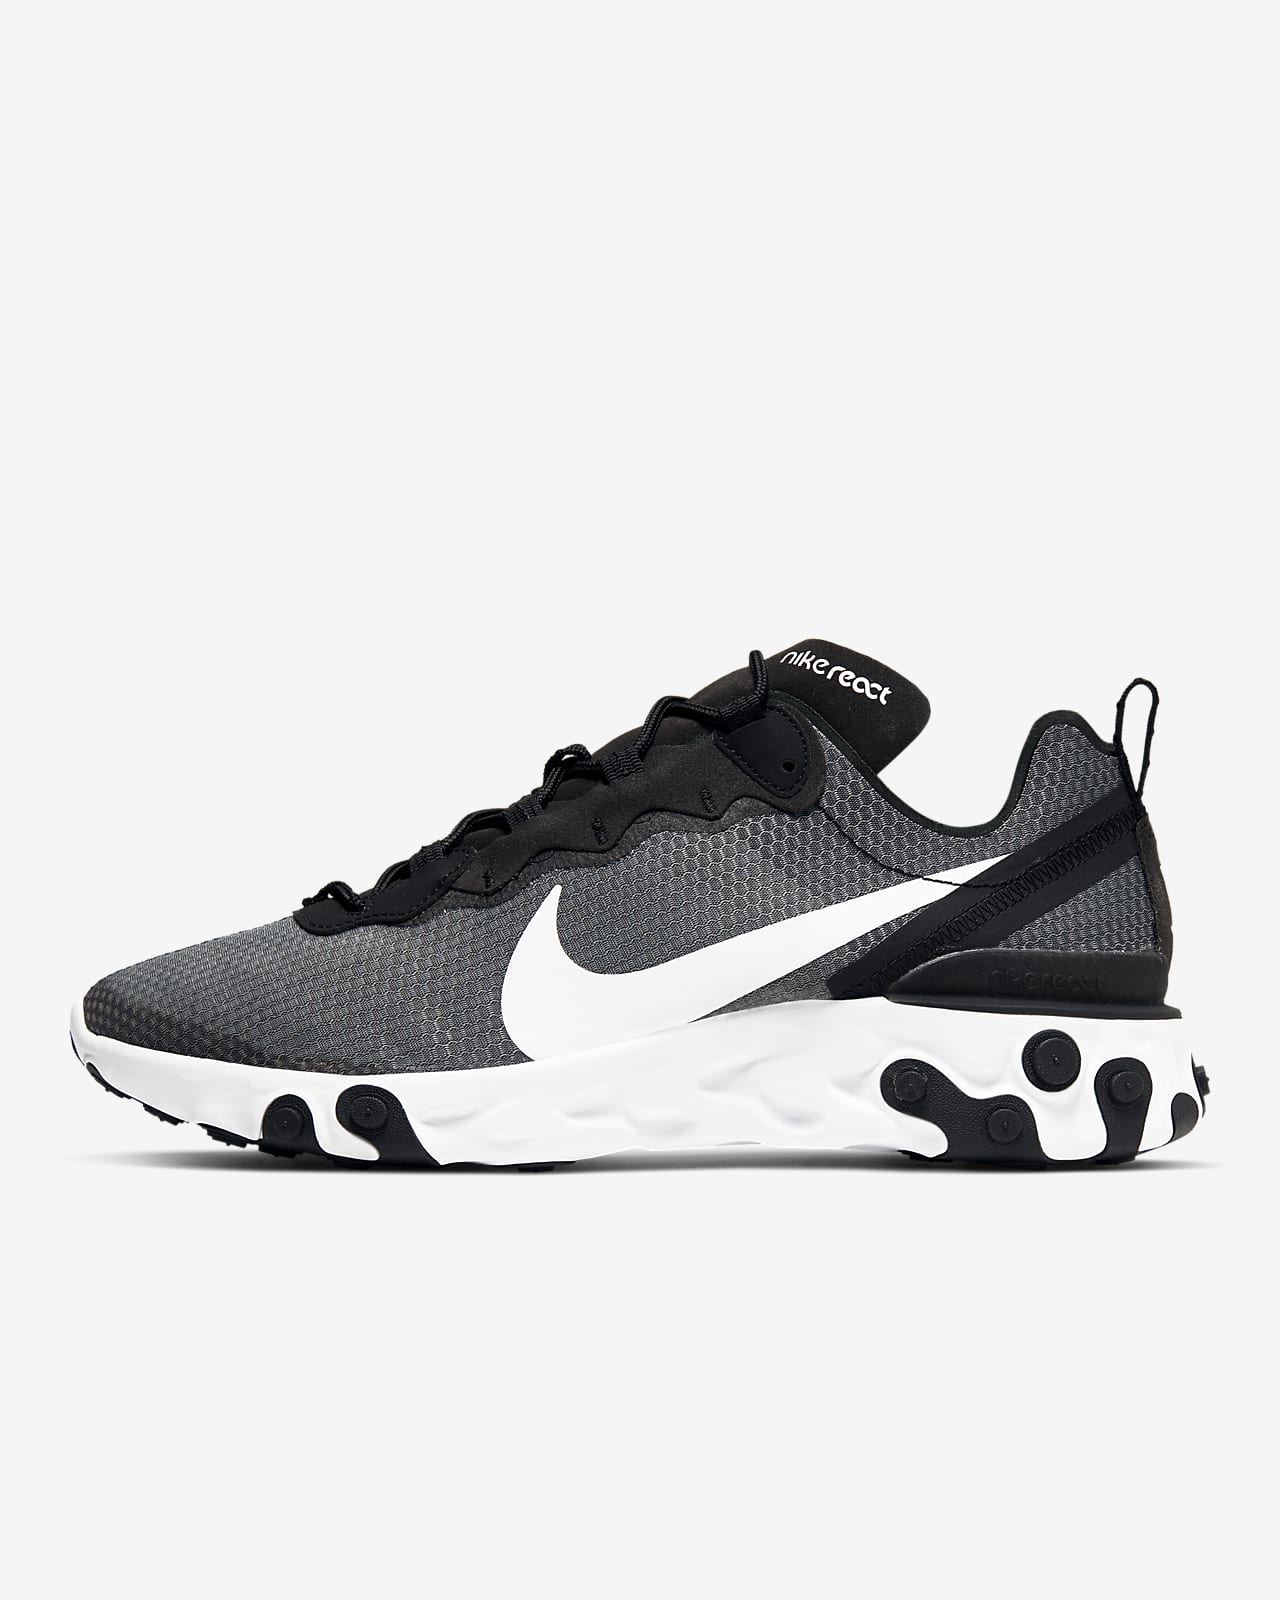 mike react element